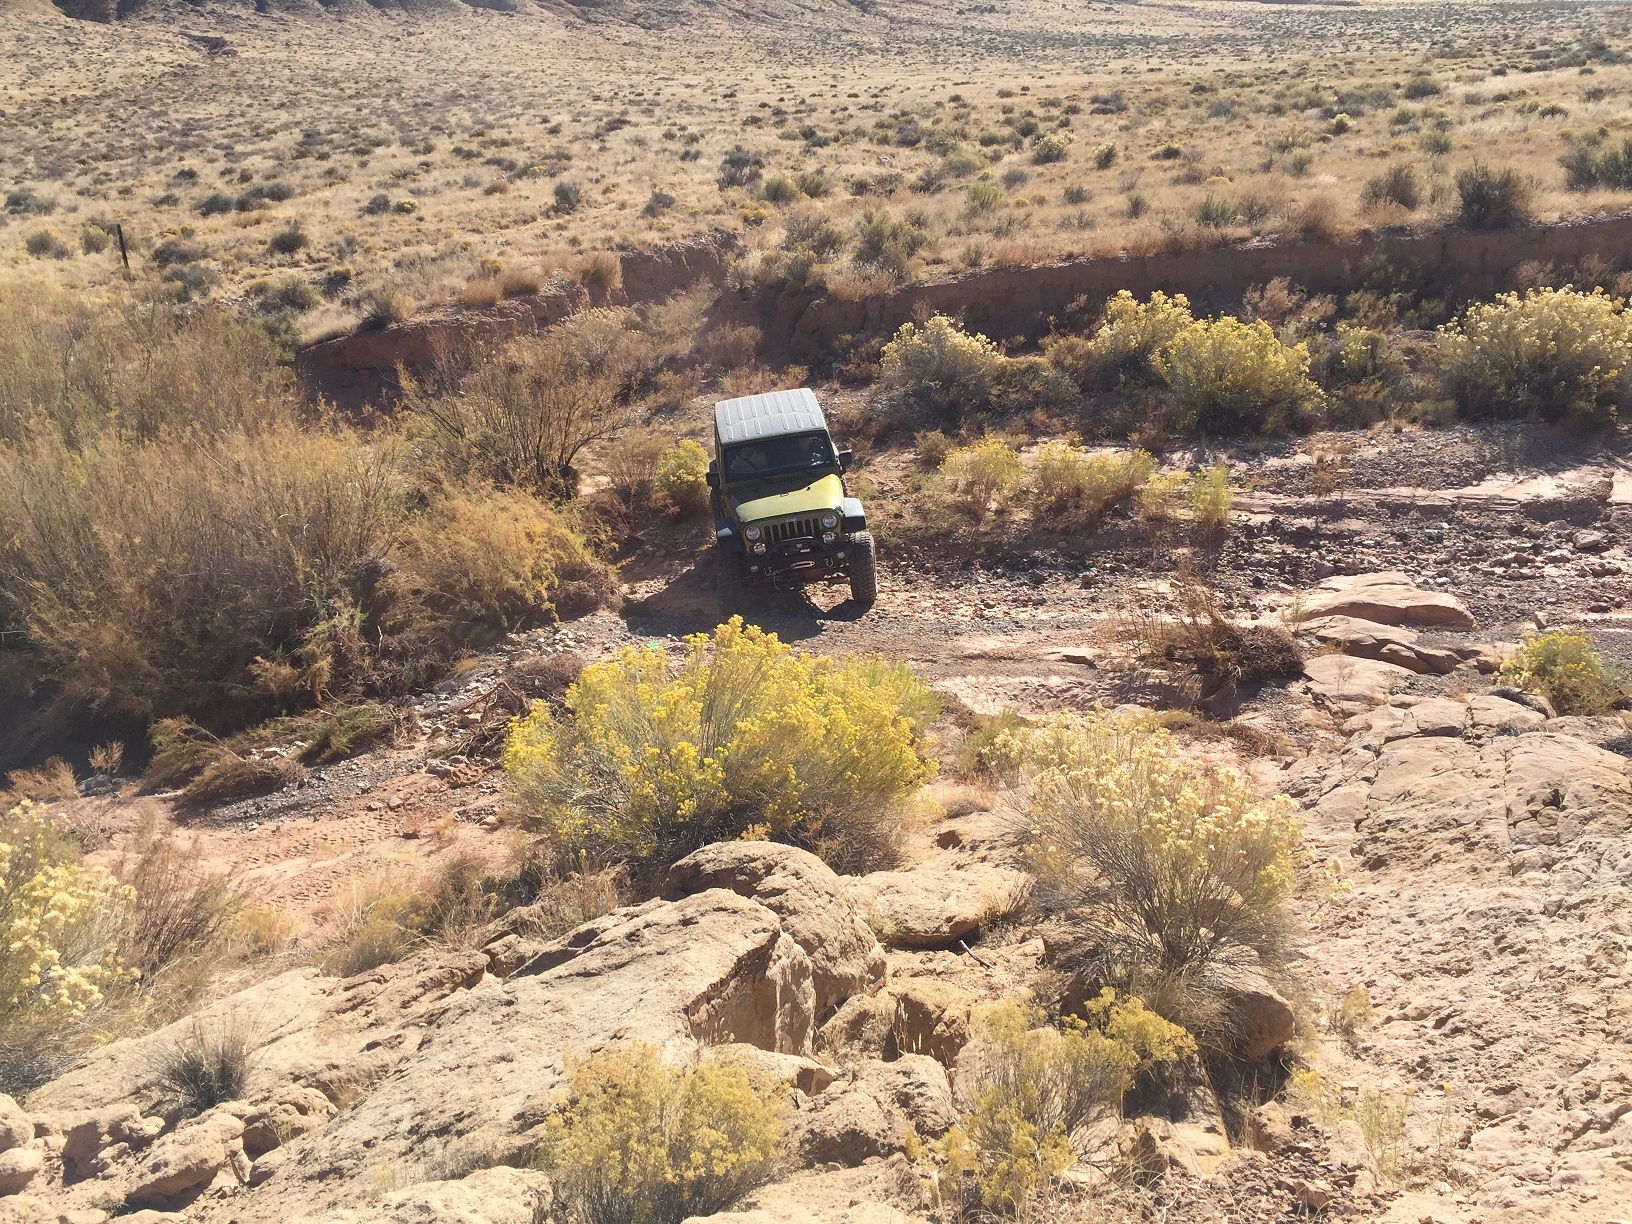 A Jeep crossing the Fort Pearce Wash where it intersects with the Temple Trail